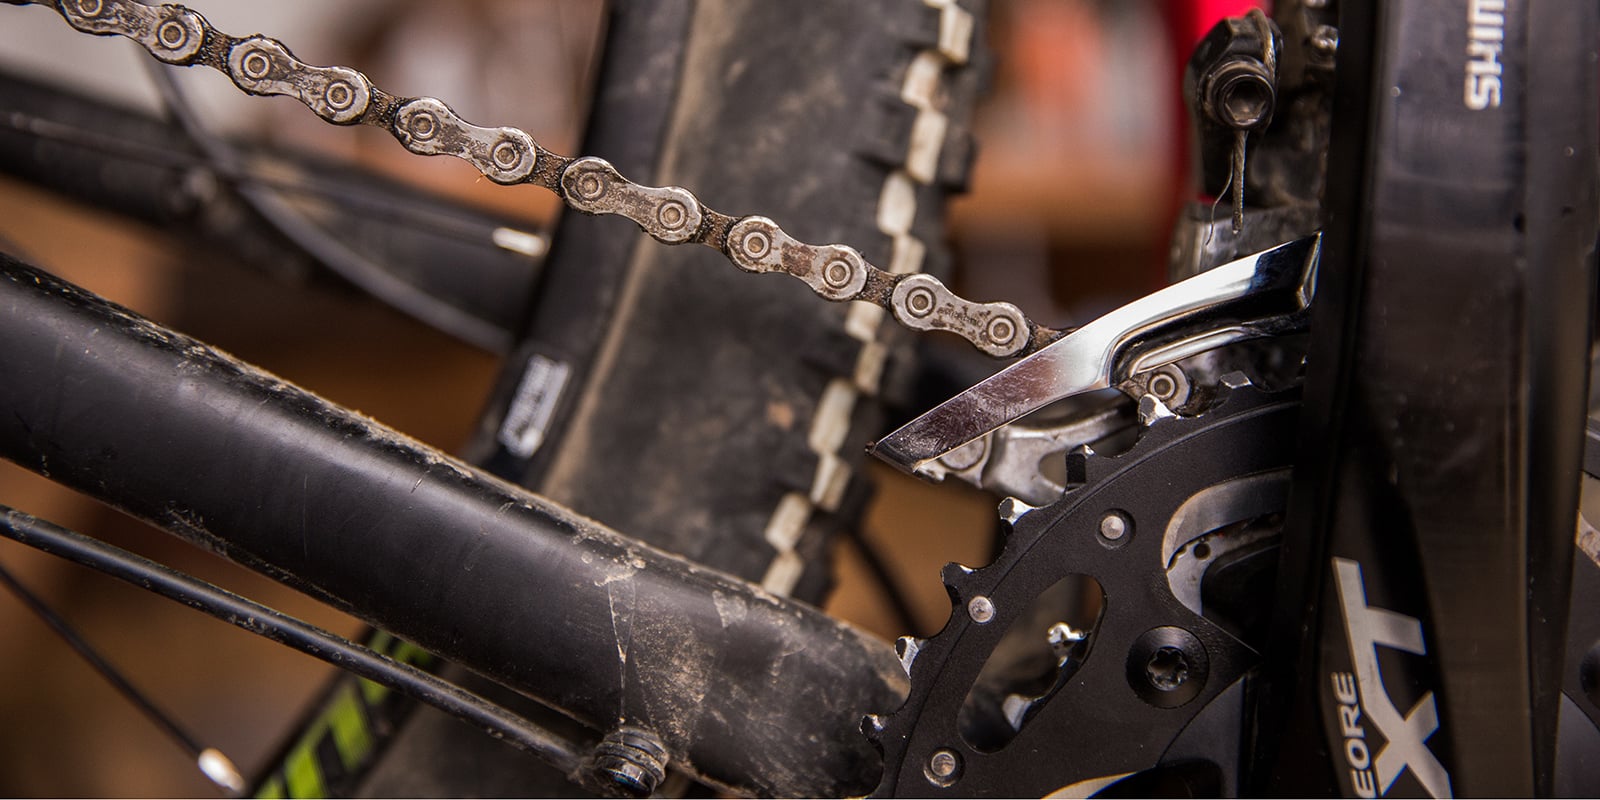 Front Derailleur Not Moving: What Went Wrong? Find Out!